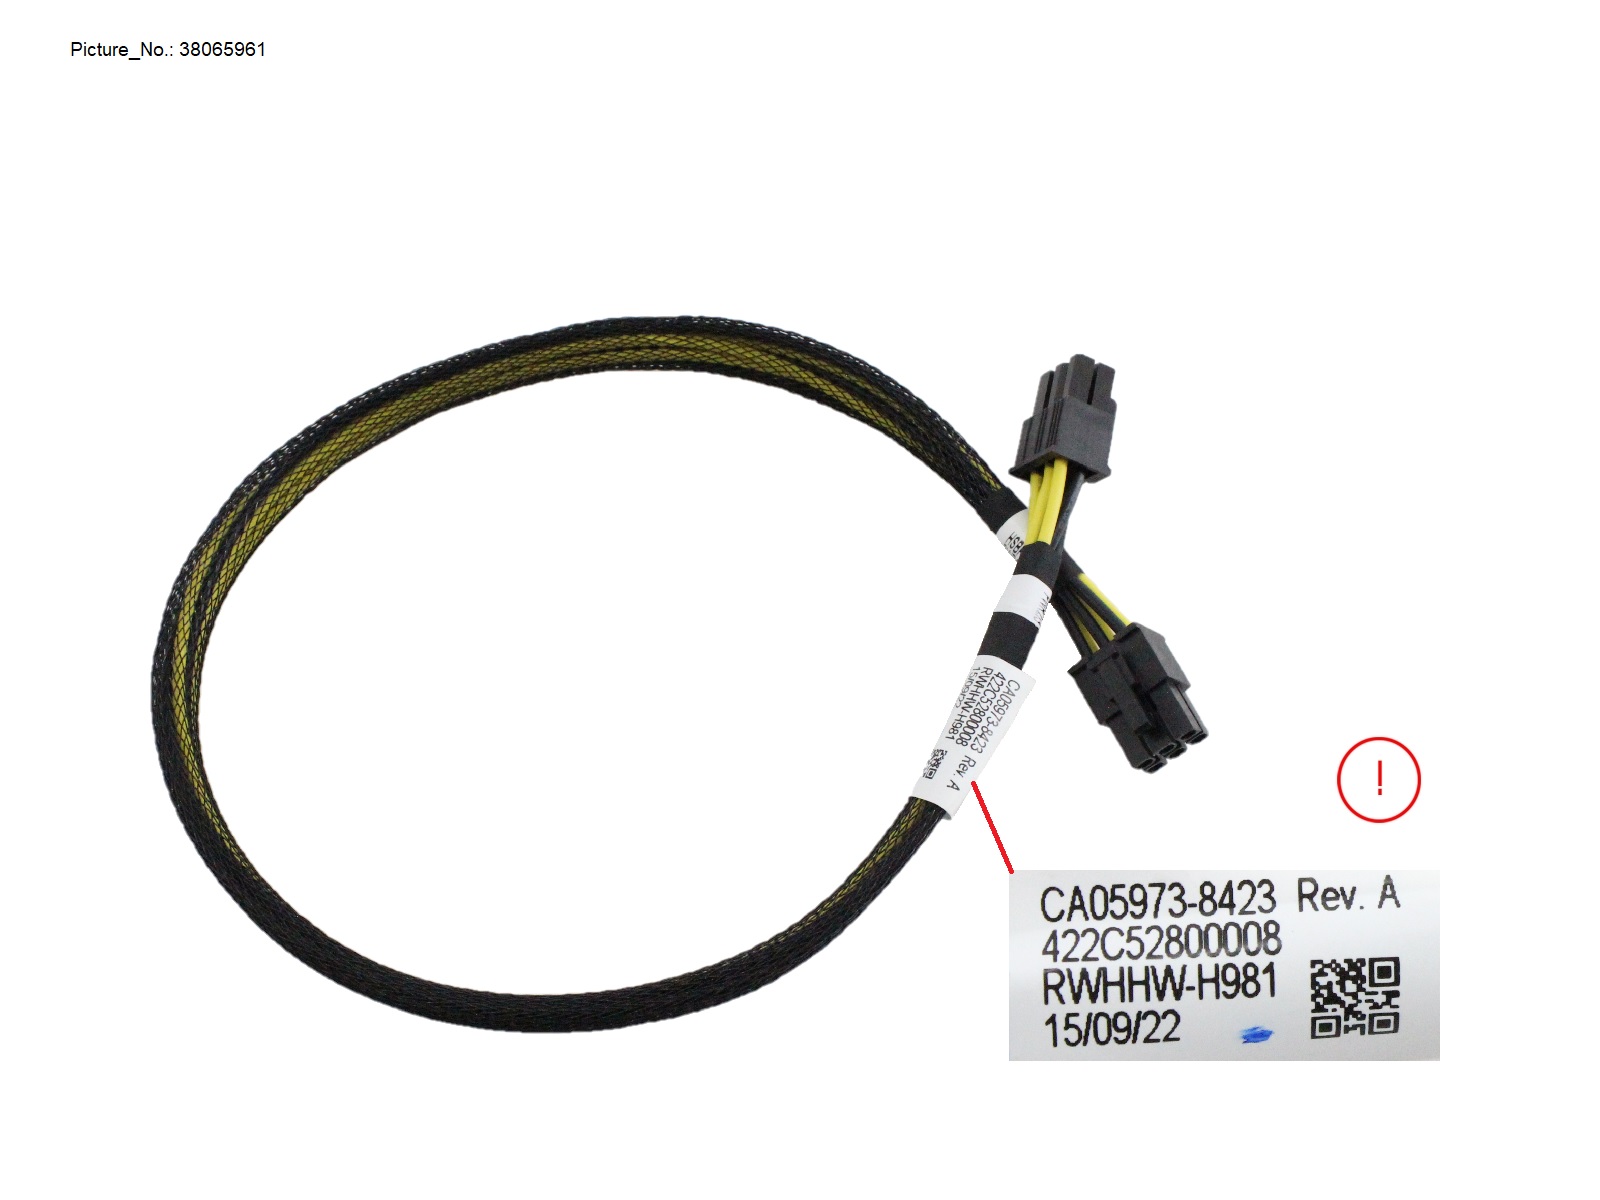 POWER CABLE FOR SAS HSBP-2 (440 MM)